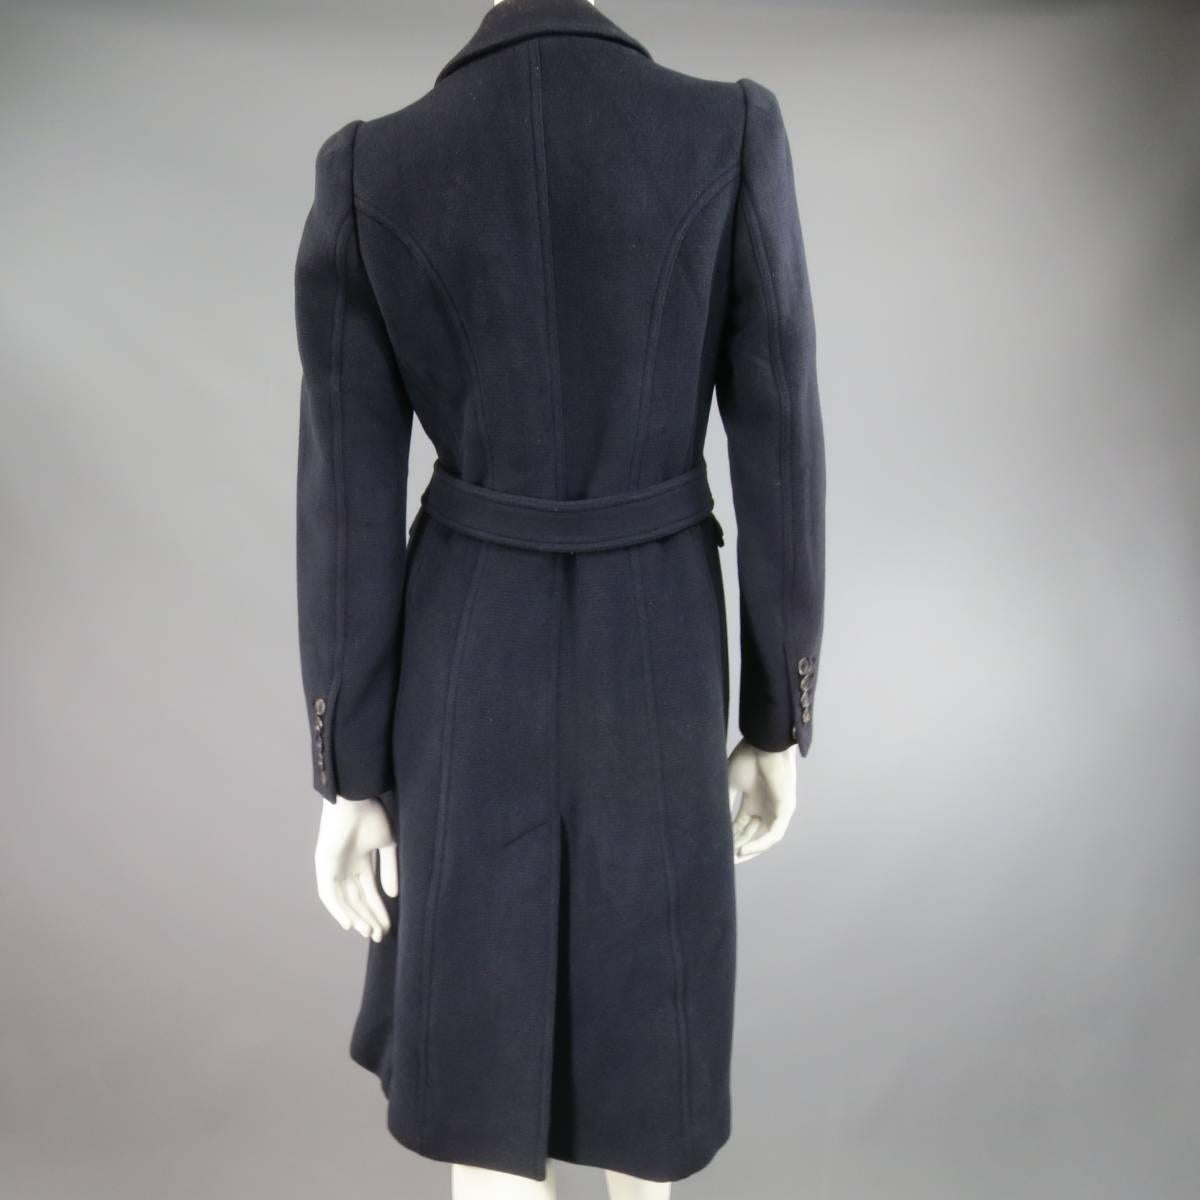 BURBERRY LONDON Size 6 Navy Virgin Wool Blend Double Breasted Pea Coat 1